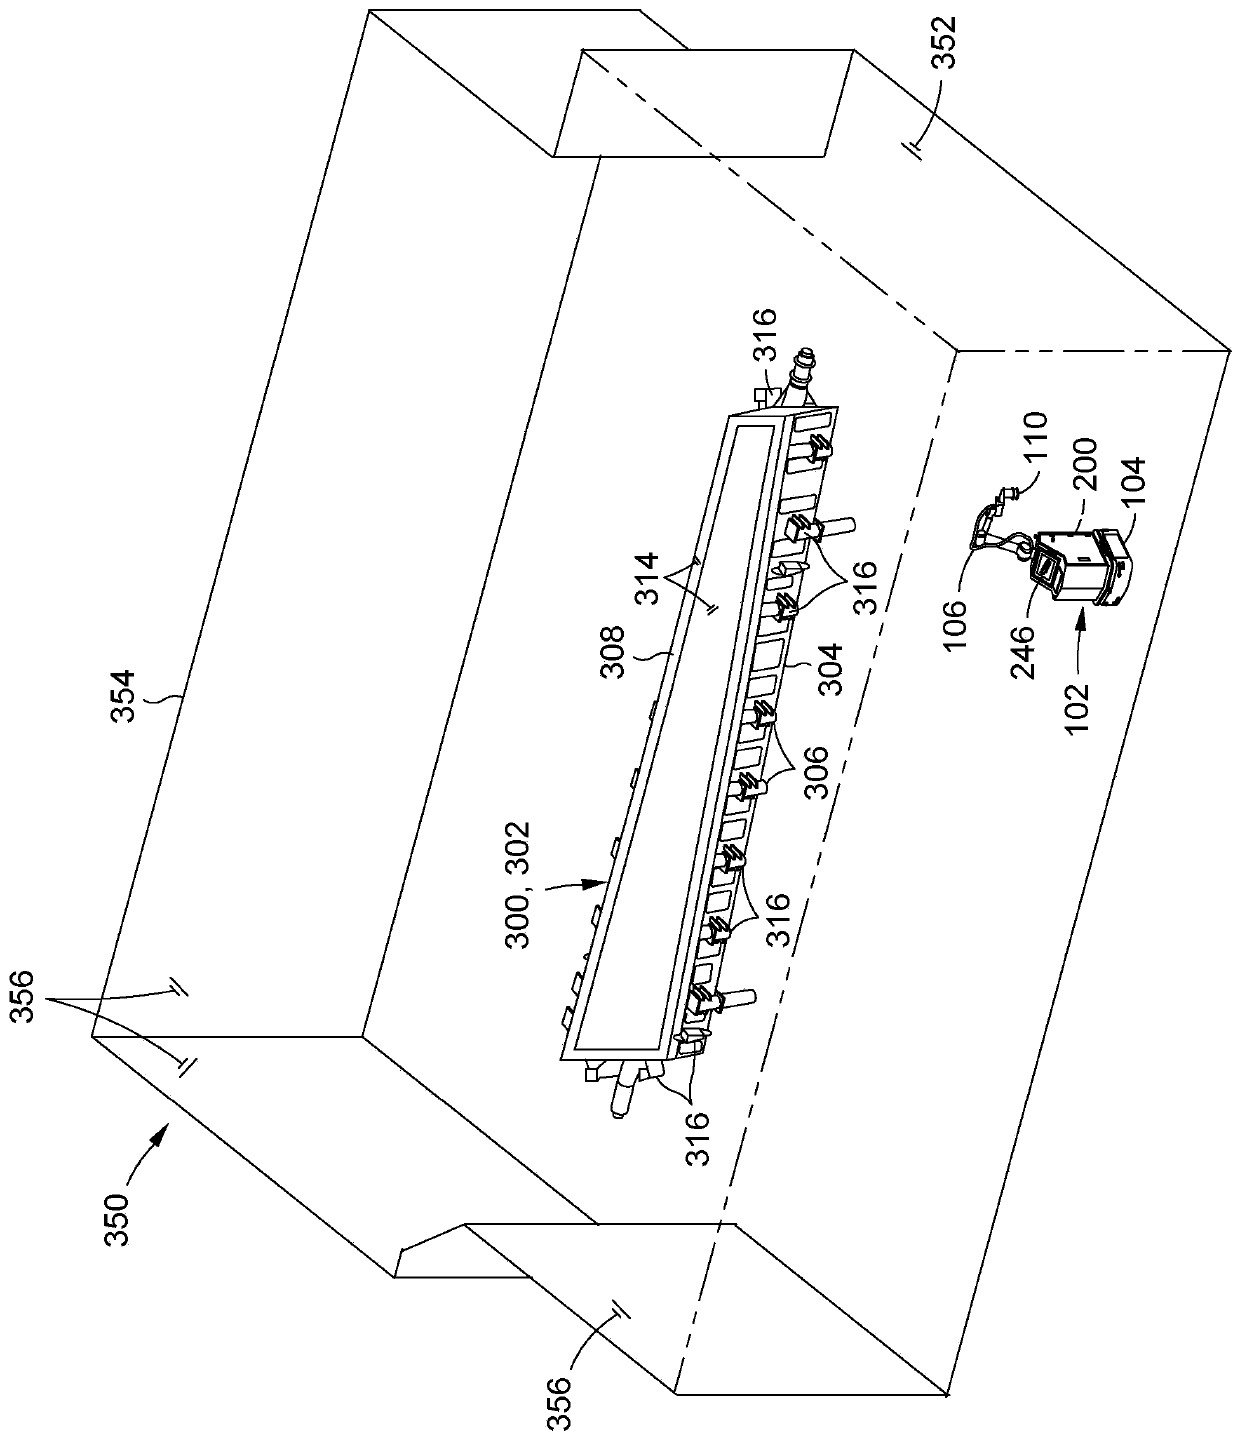 Robotic system and method for operating on workpiece